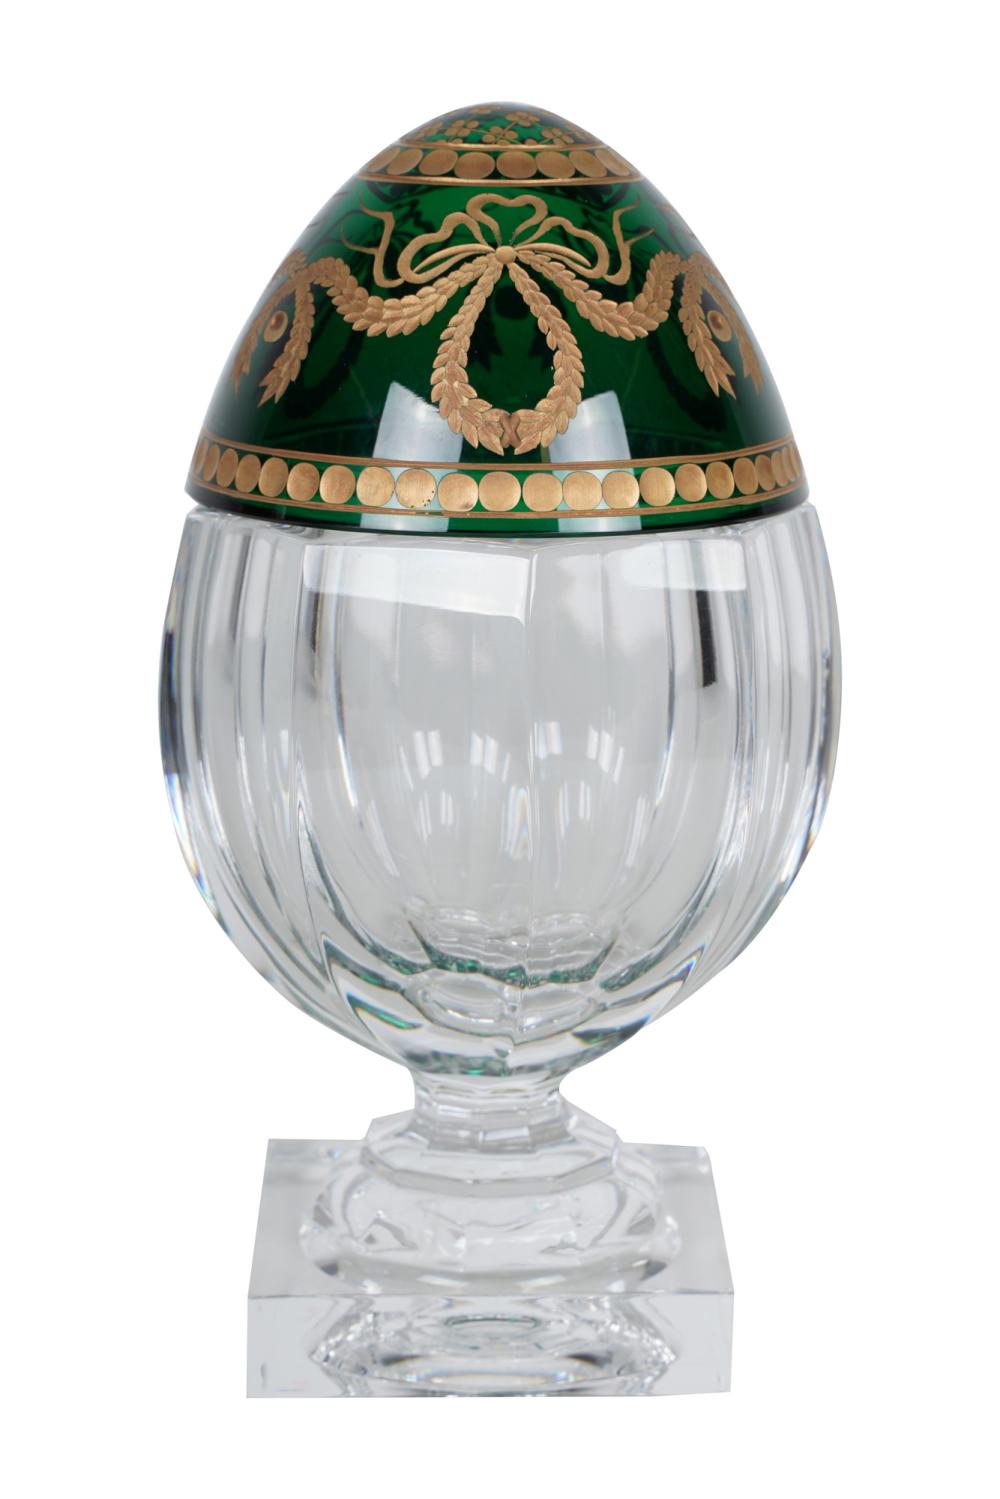 FABREGE CRYSTAL EGG FORM BOX7 3/4 inches